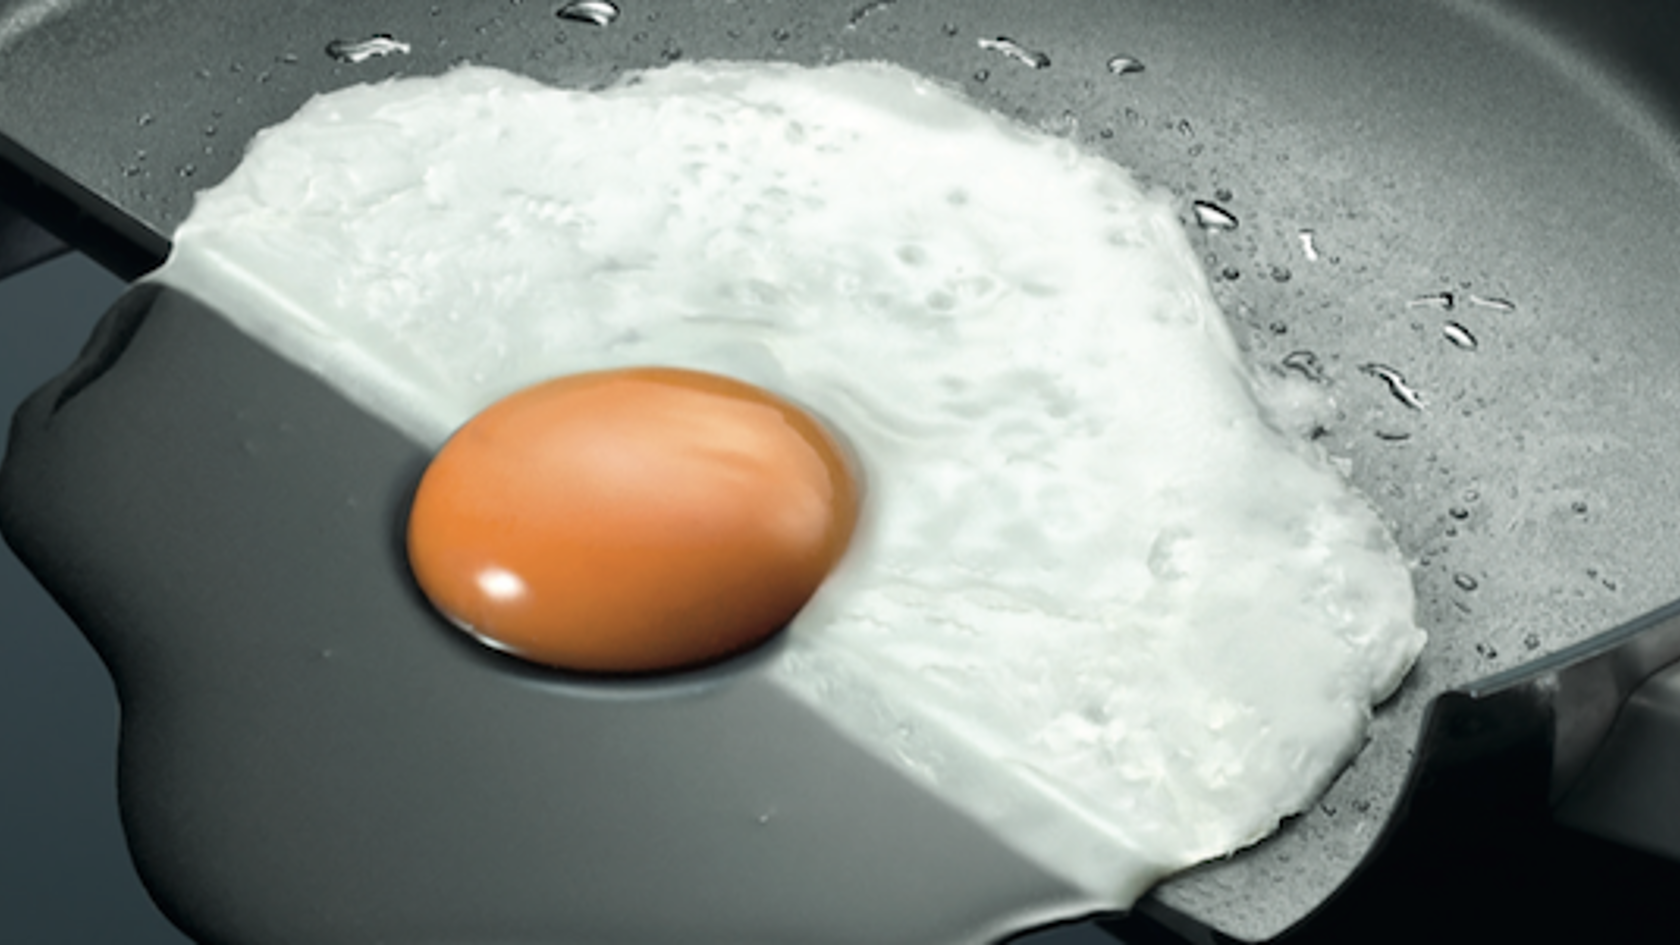 Egg cooking on an induction hob